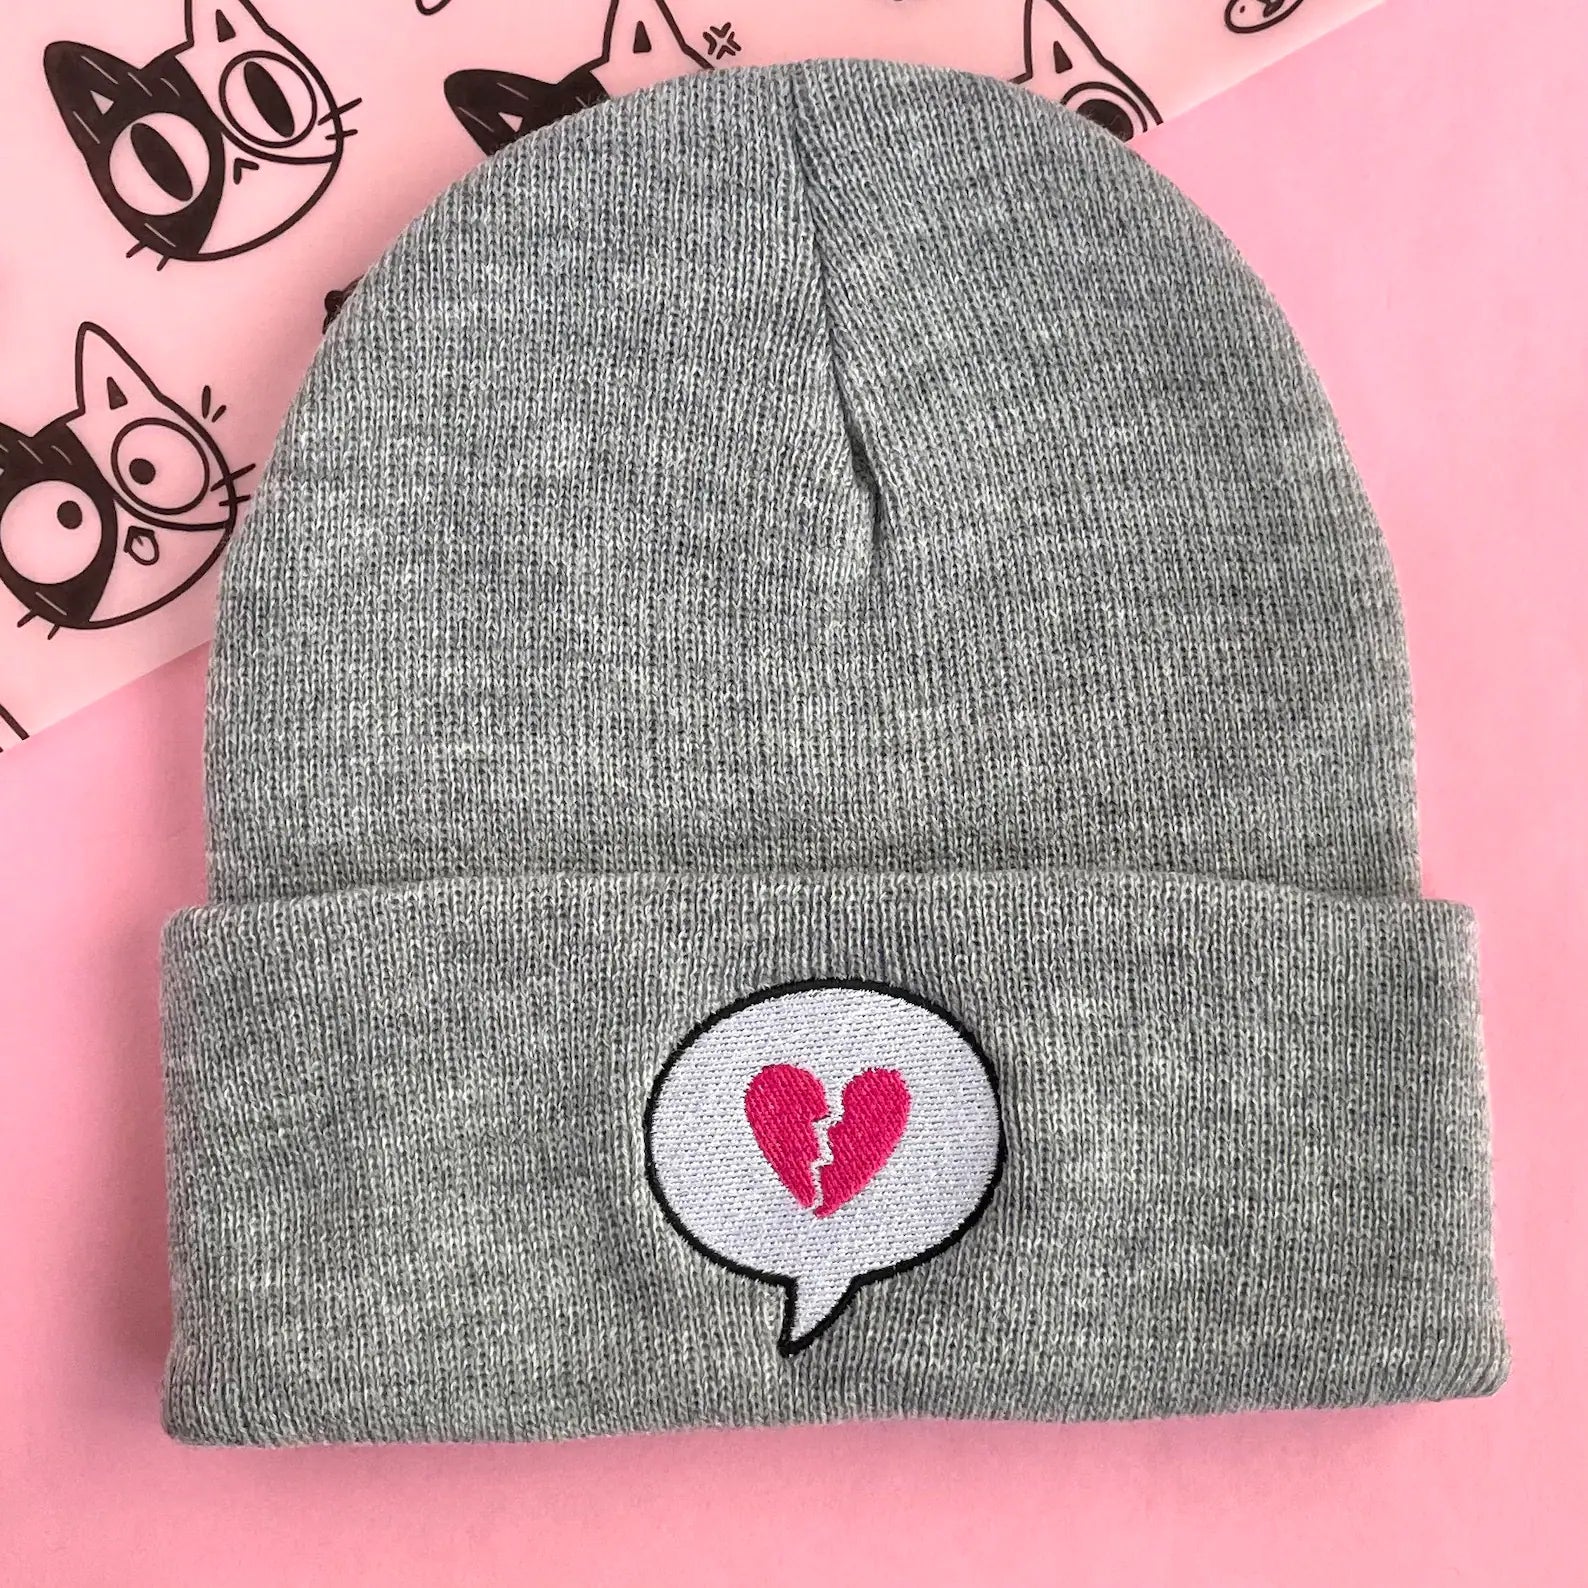 HEART SPEECH BUBBLE EMBROIDERED BEANIE